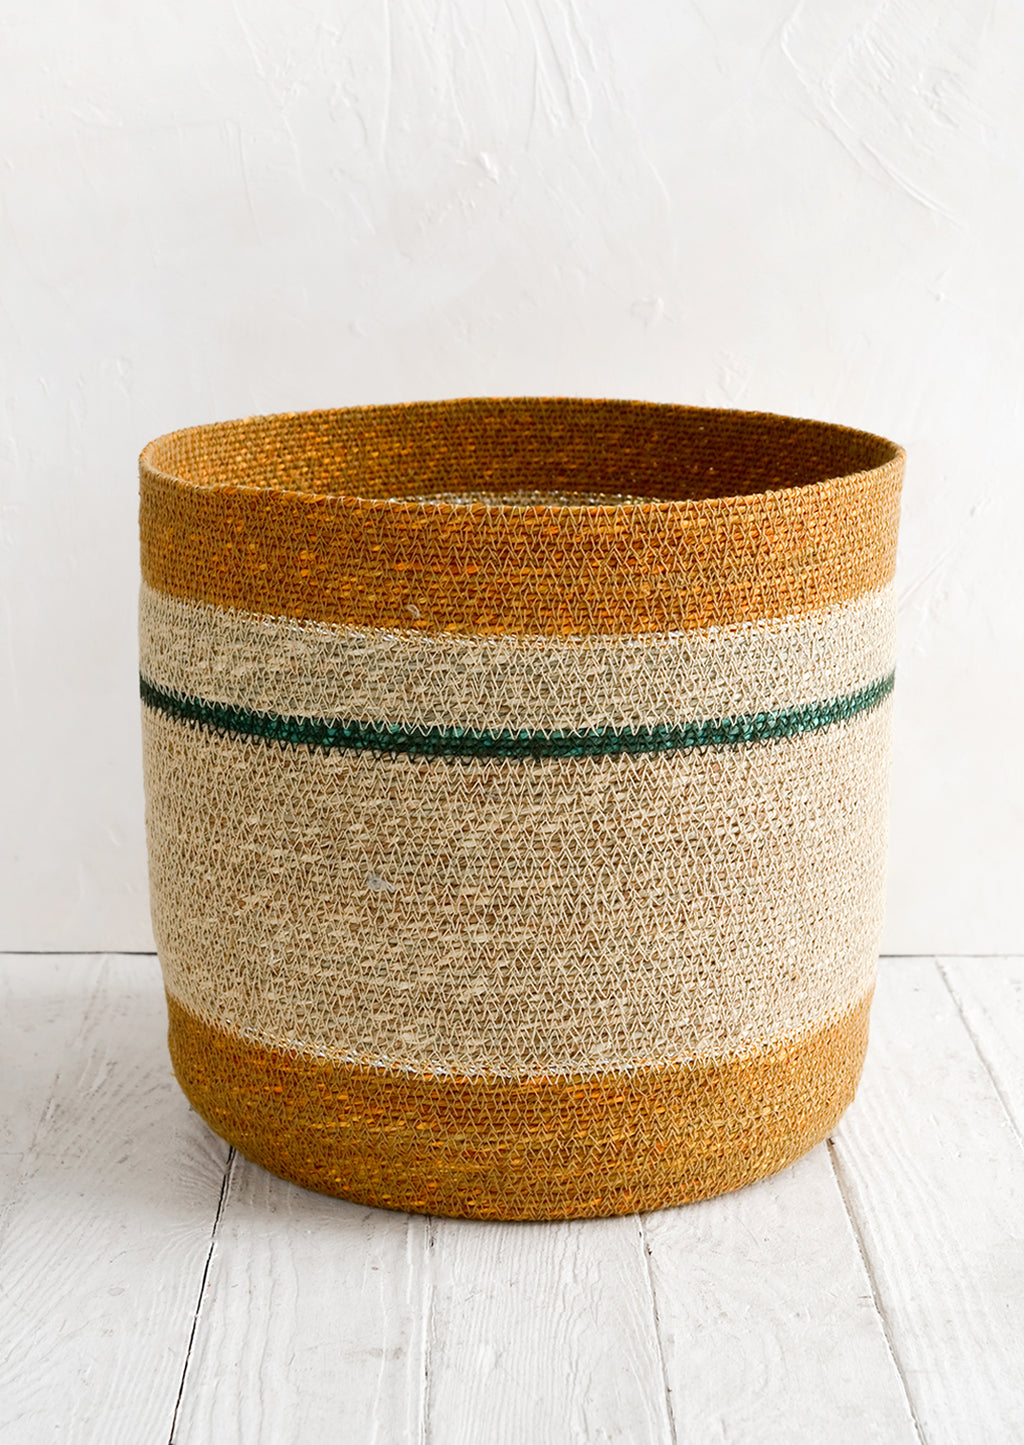 1: A round open-top storage basket woven from seagrass in ochre, natural and teal stripes.